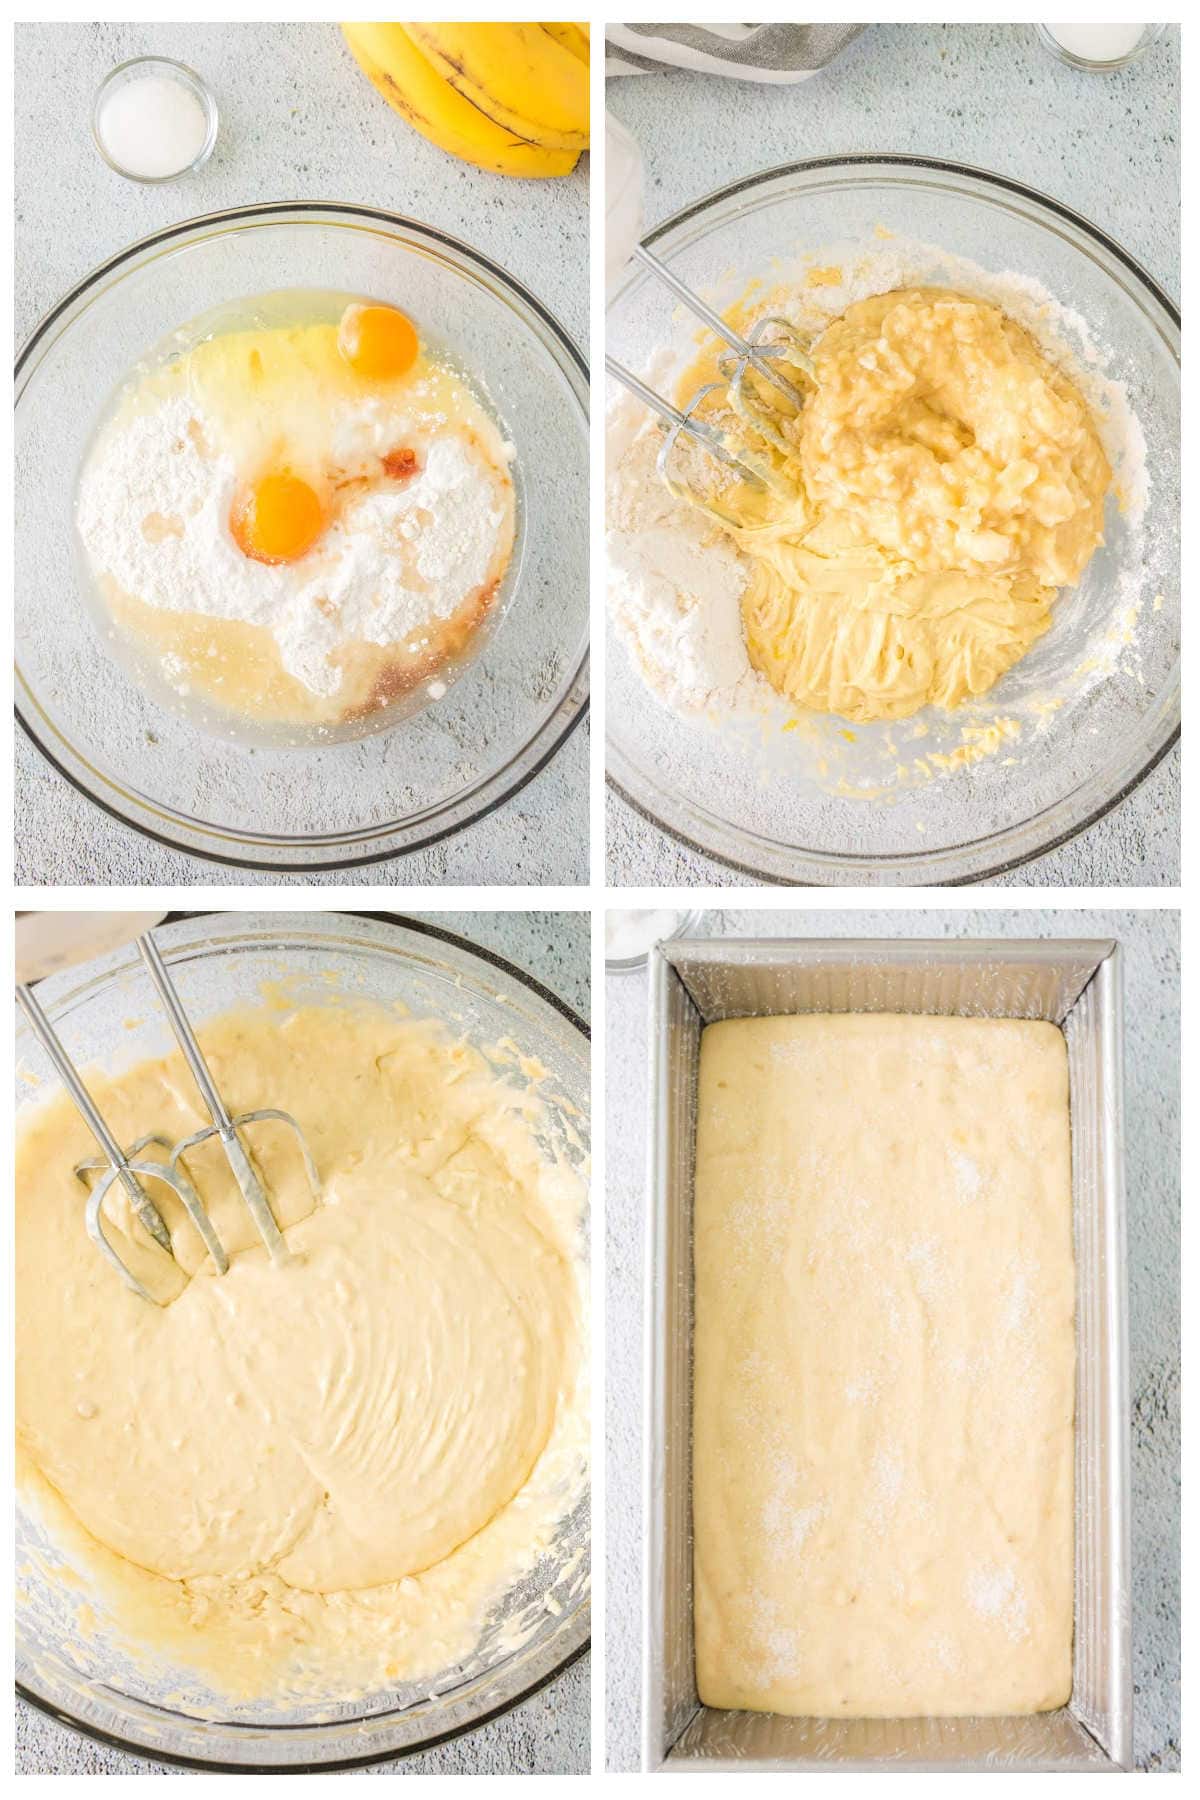 Collage showing the steps for making this banana bread recipe.